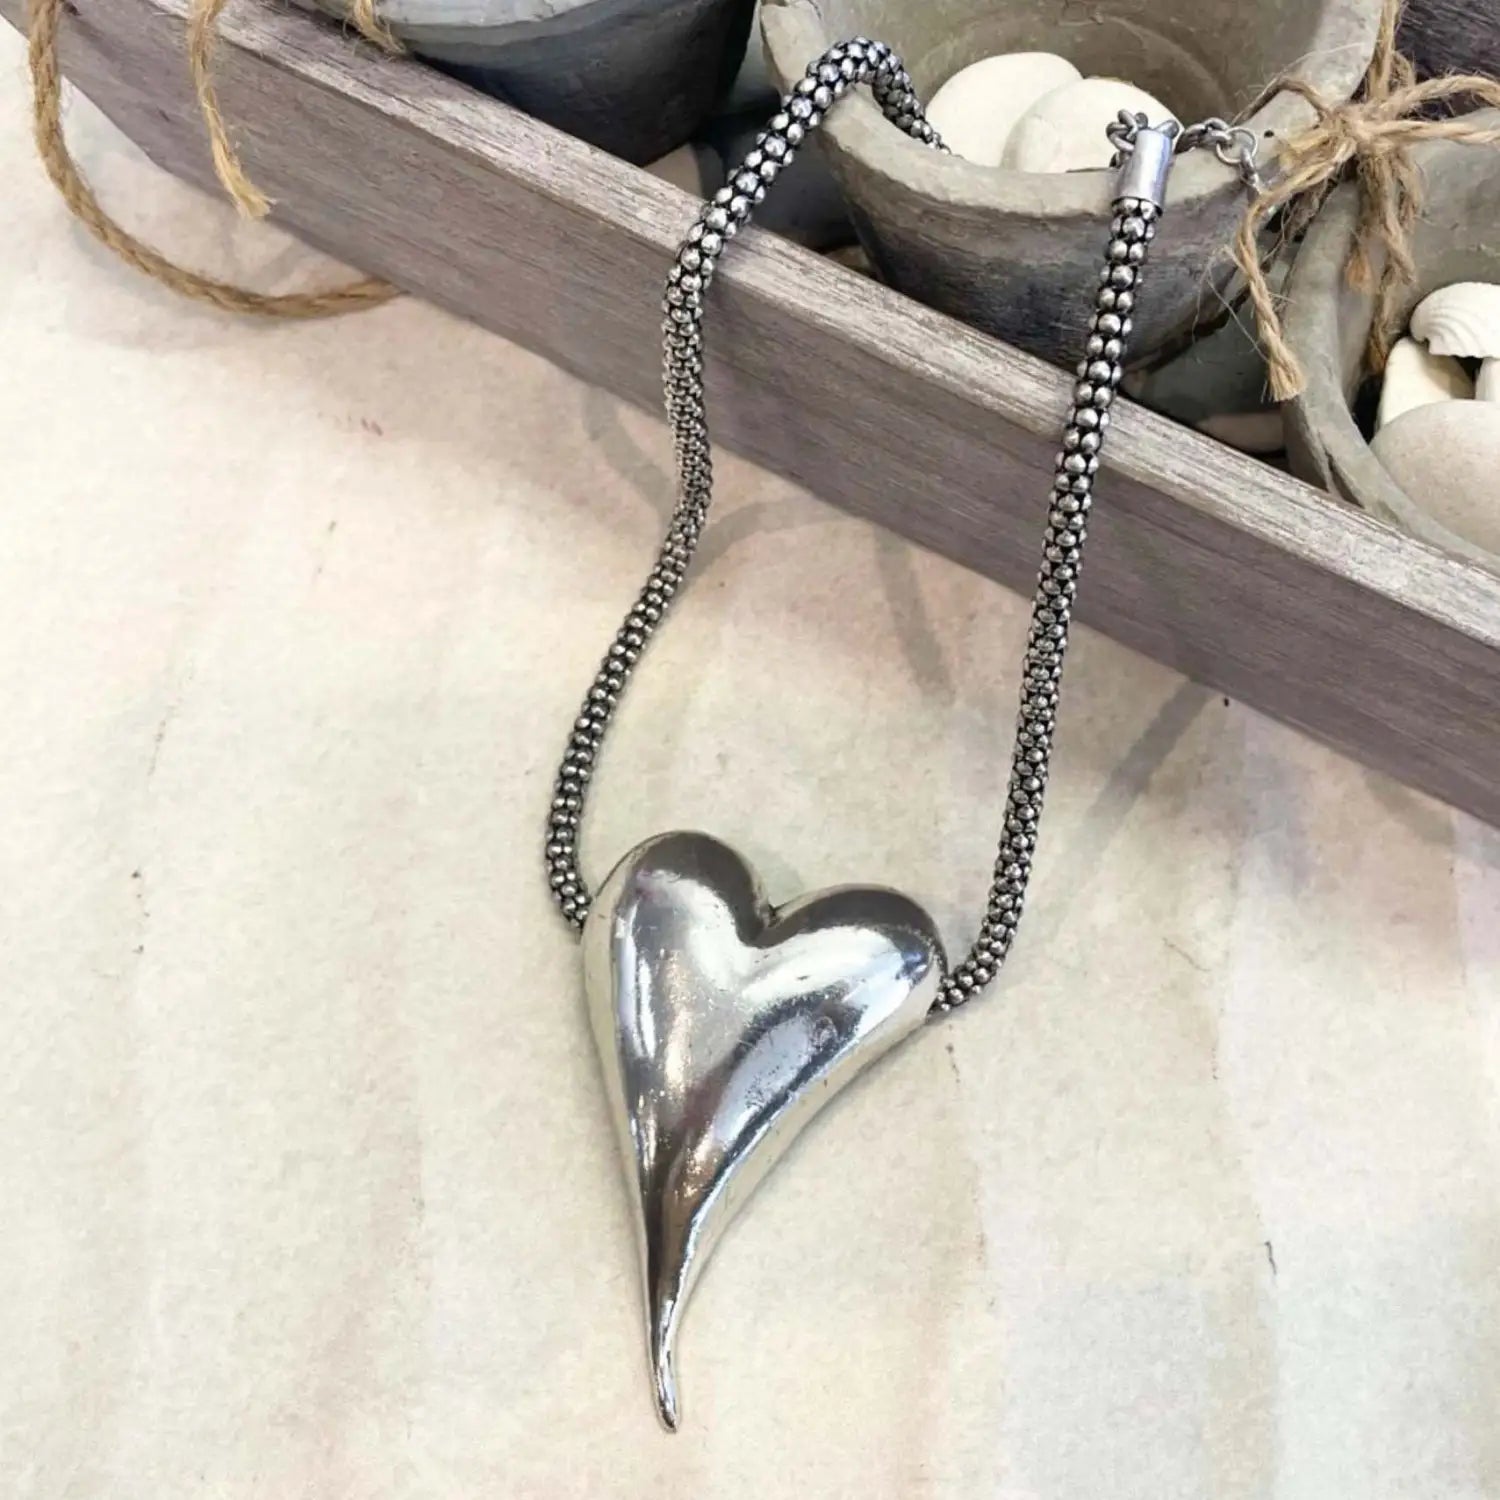 Chunky silver heart pendant on wooden box - Chunky heart pendant necklace, statement accessory